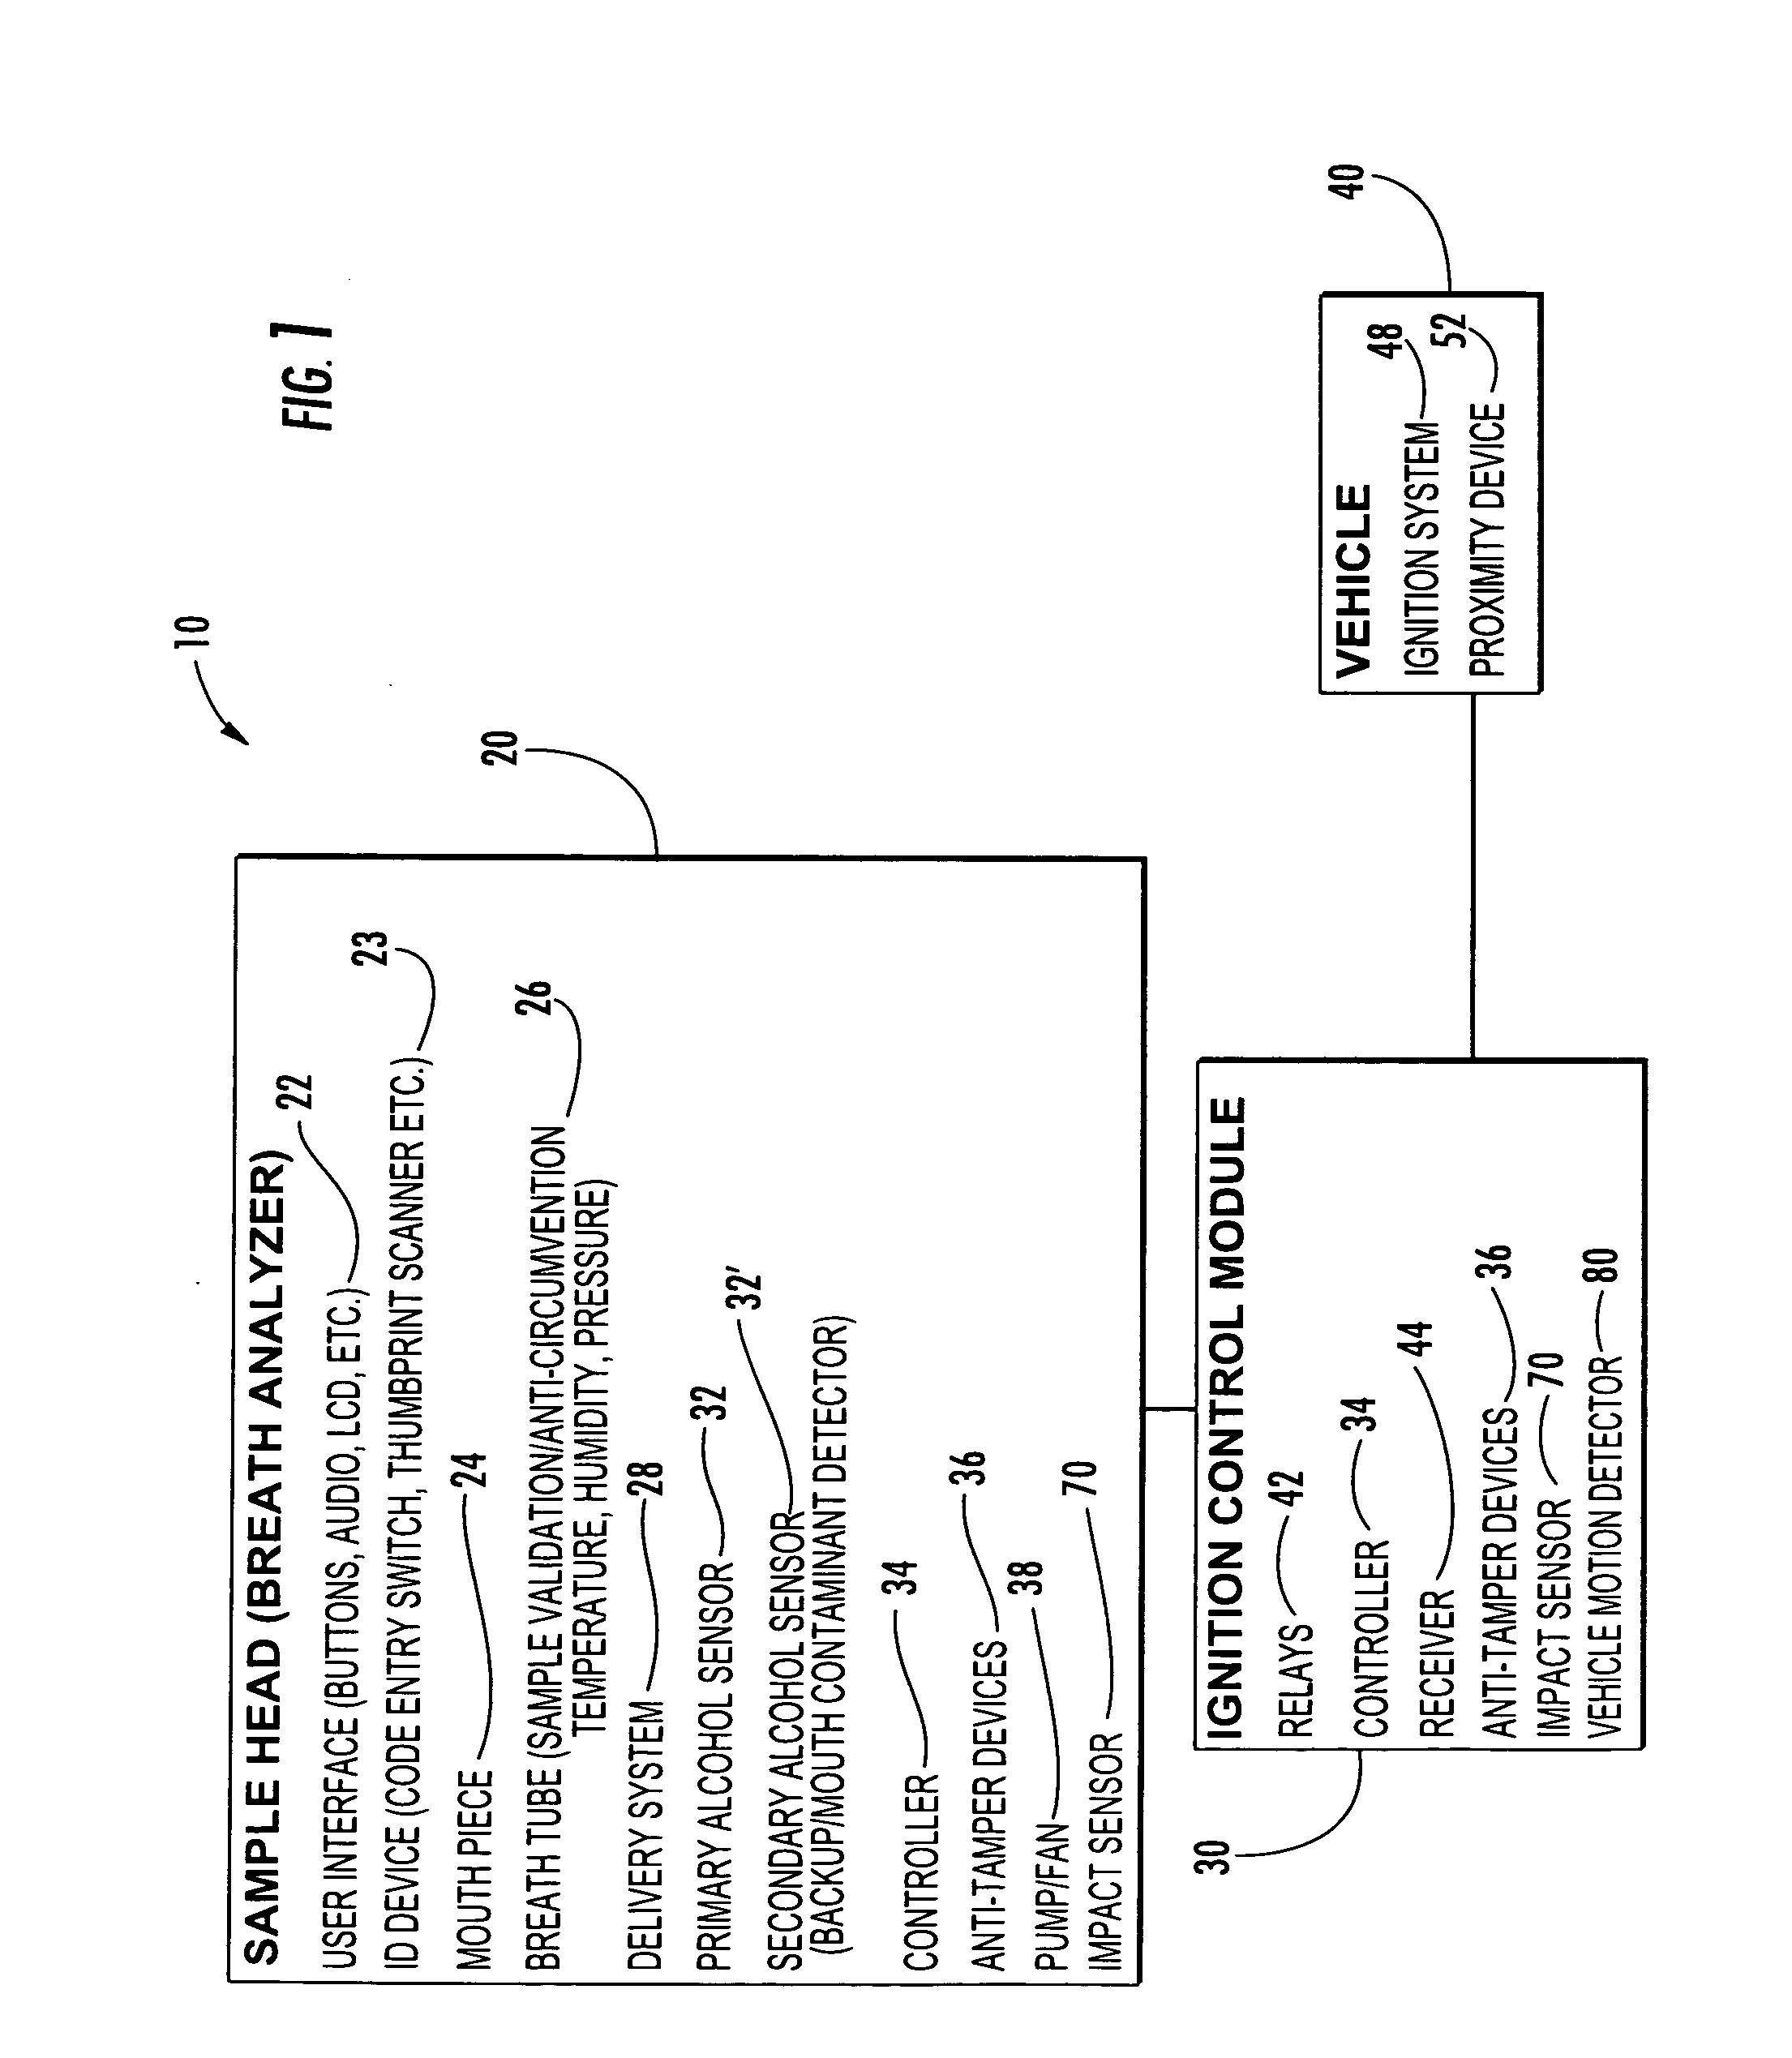 Vehicle ignition interlock systems with multiple alcohol sensors